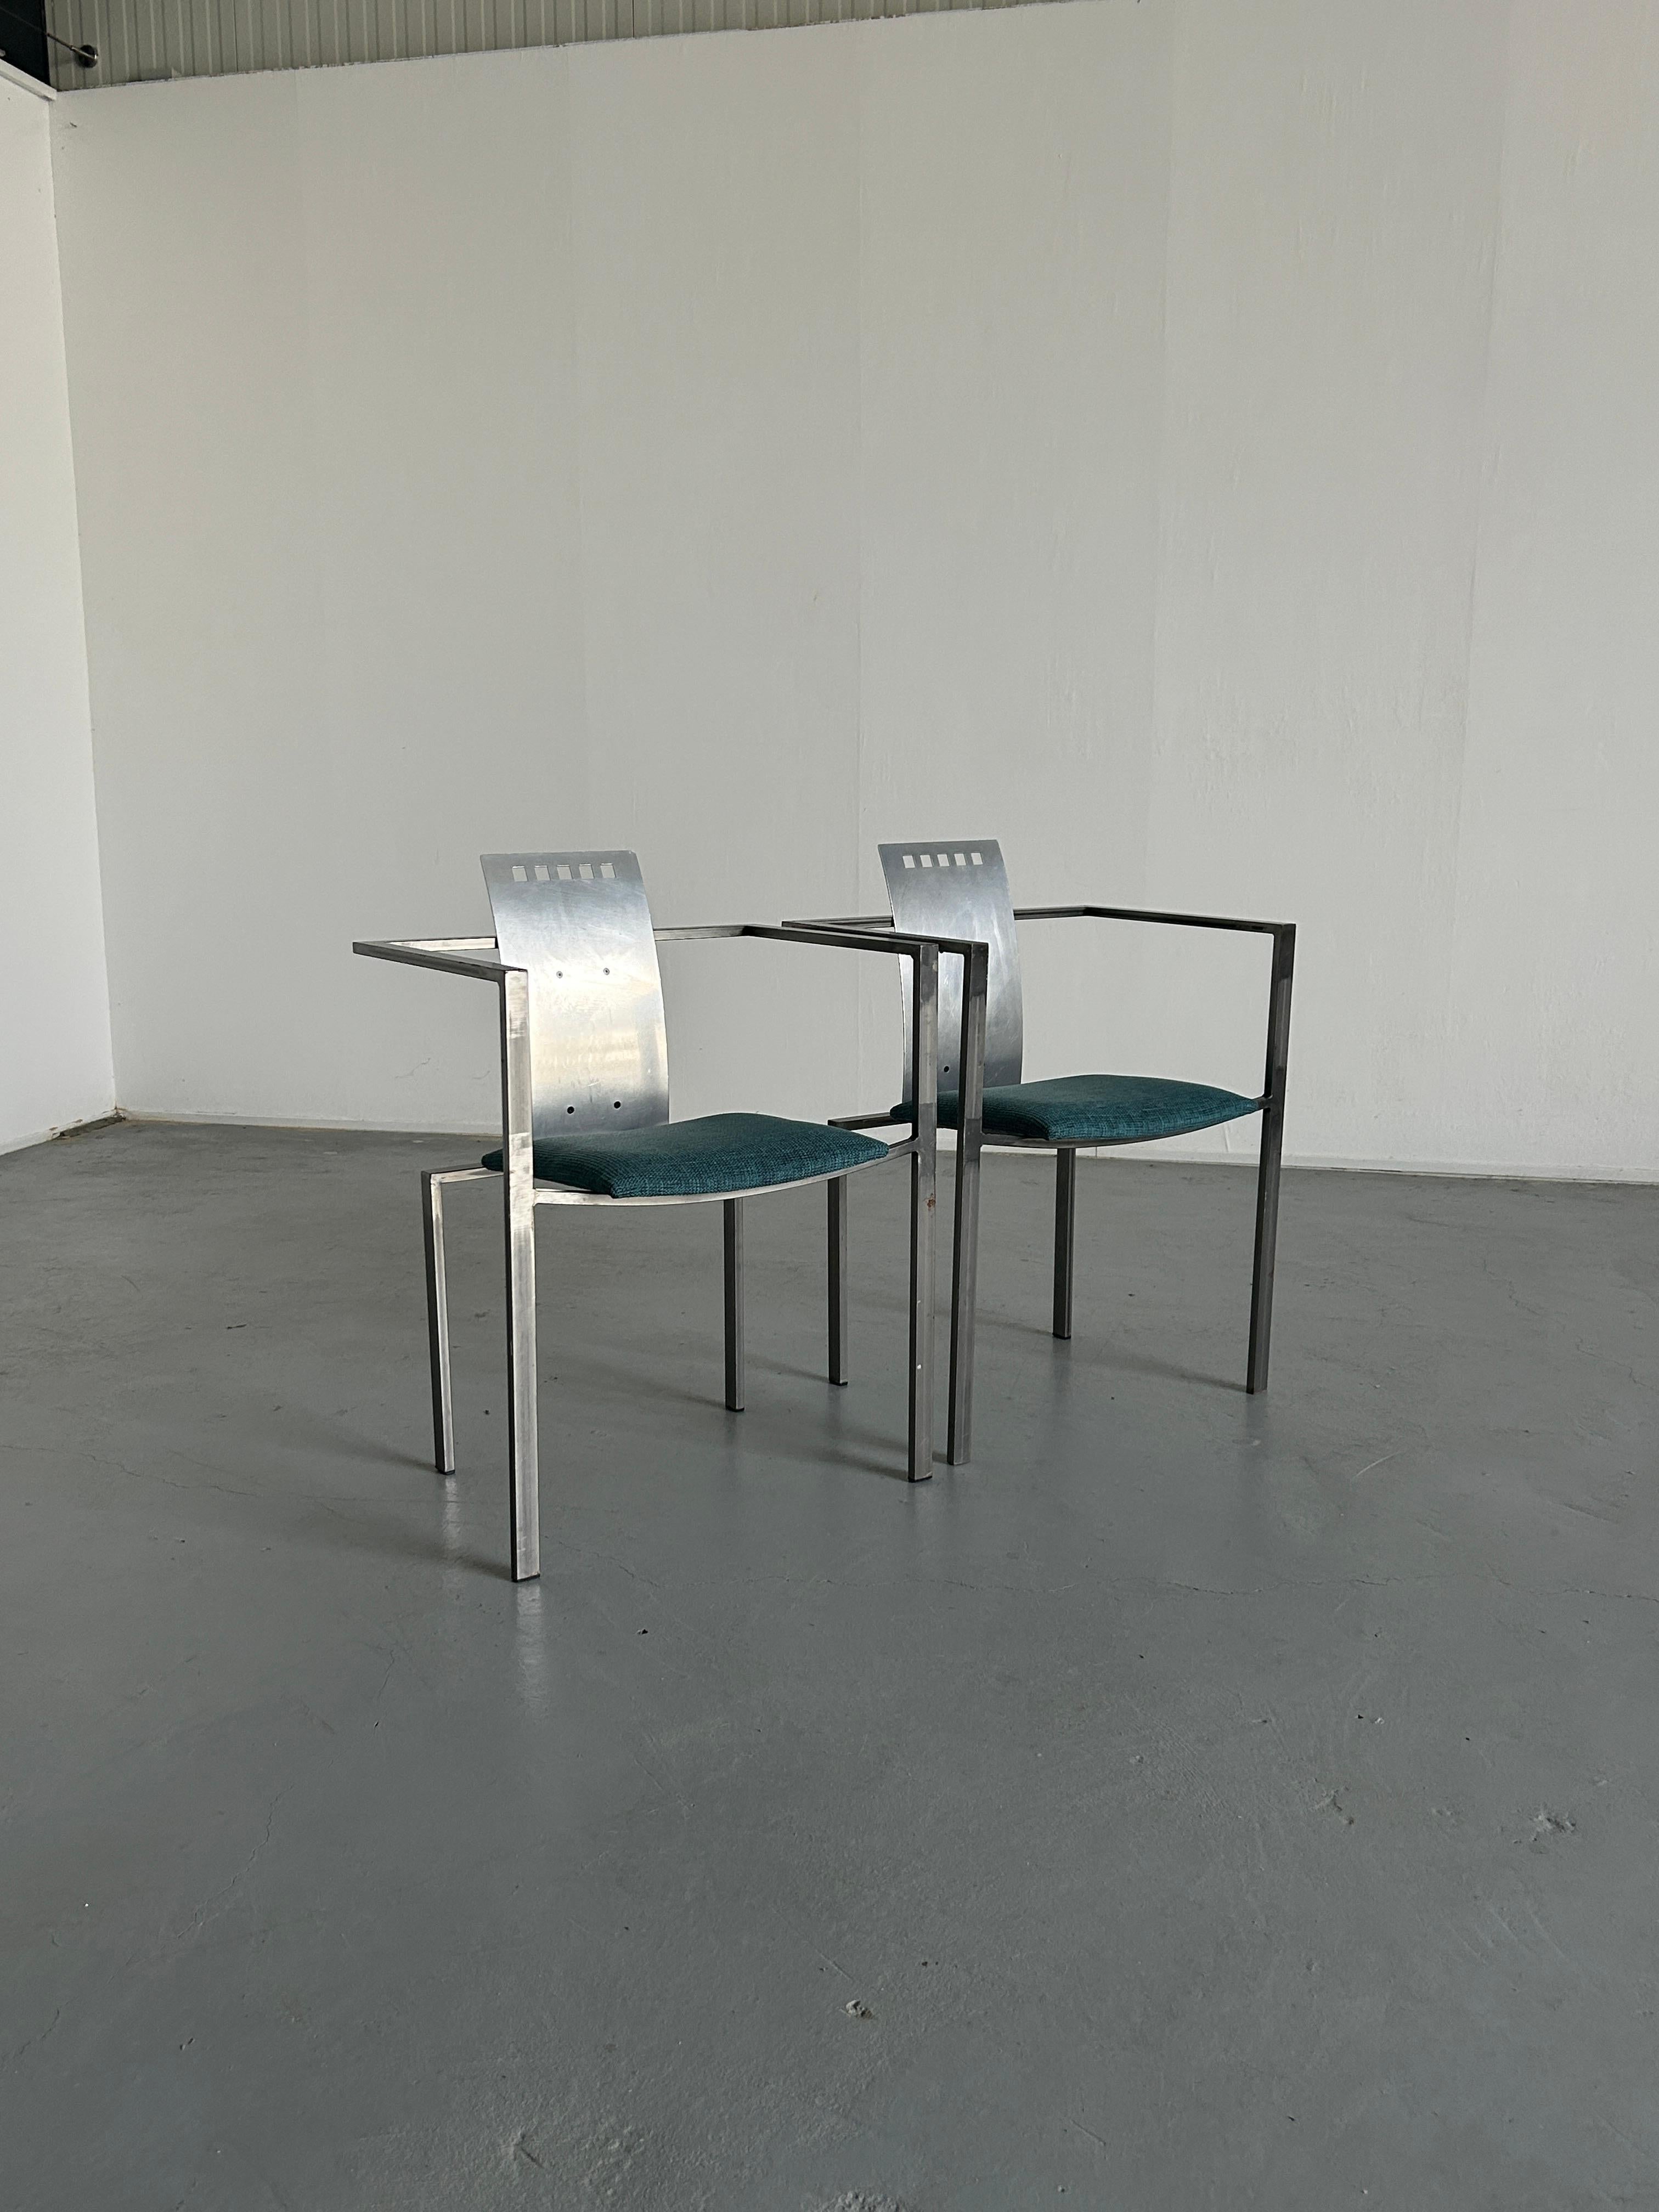 Late 20th Century 1 of 2 Memphis Design Postmodern Chairs by Karl Friedrich Förster for KFF, 1980s